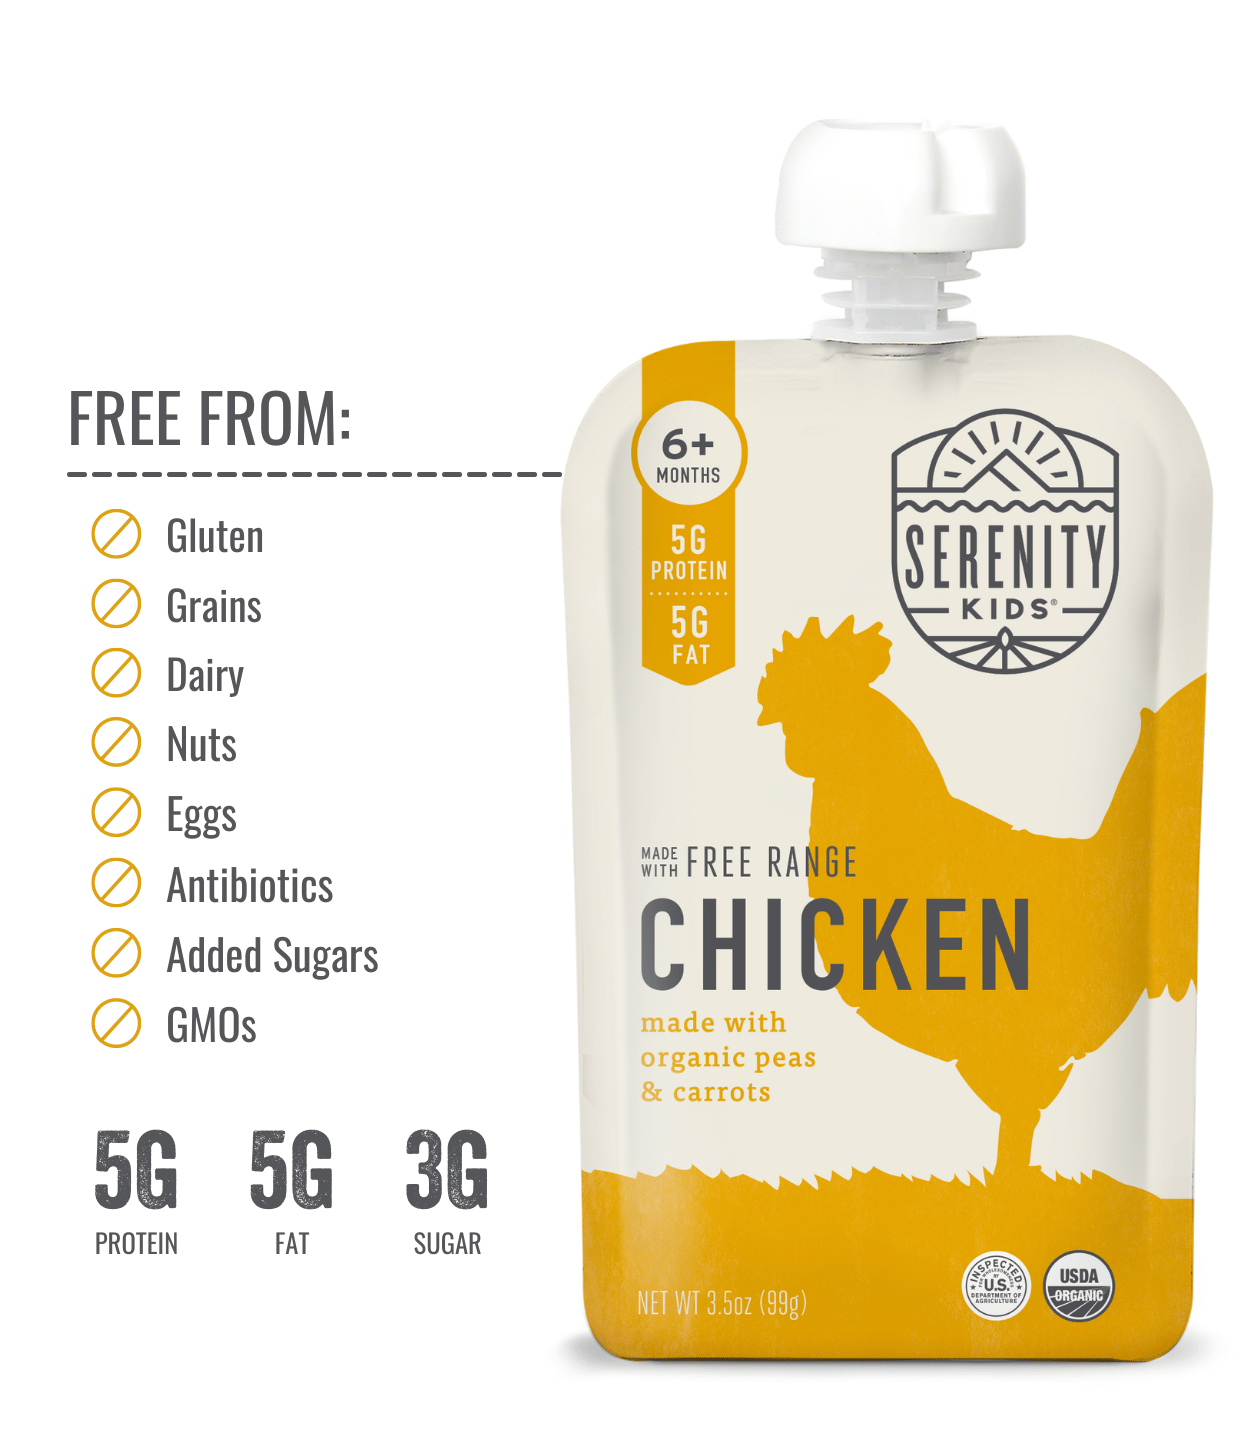 Free Range Chicken Baby Food Pouch with Organic Peas and Carrots